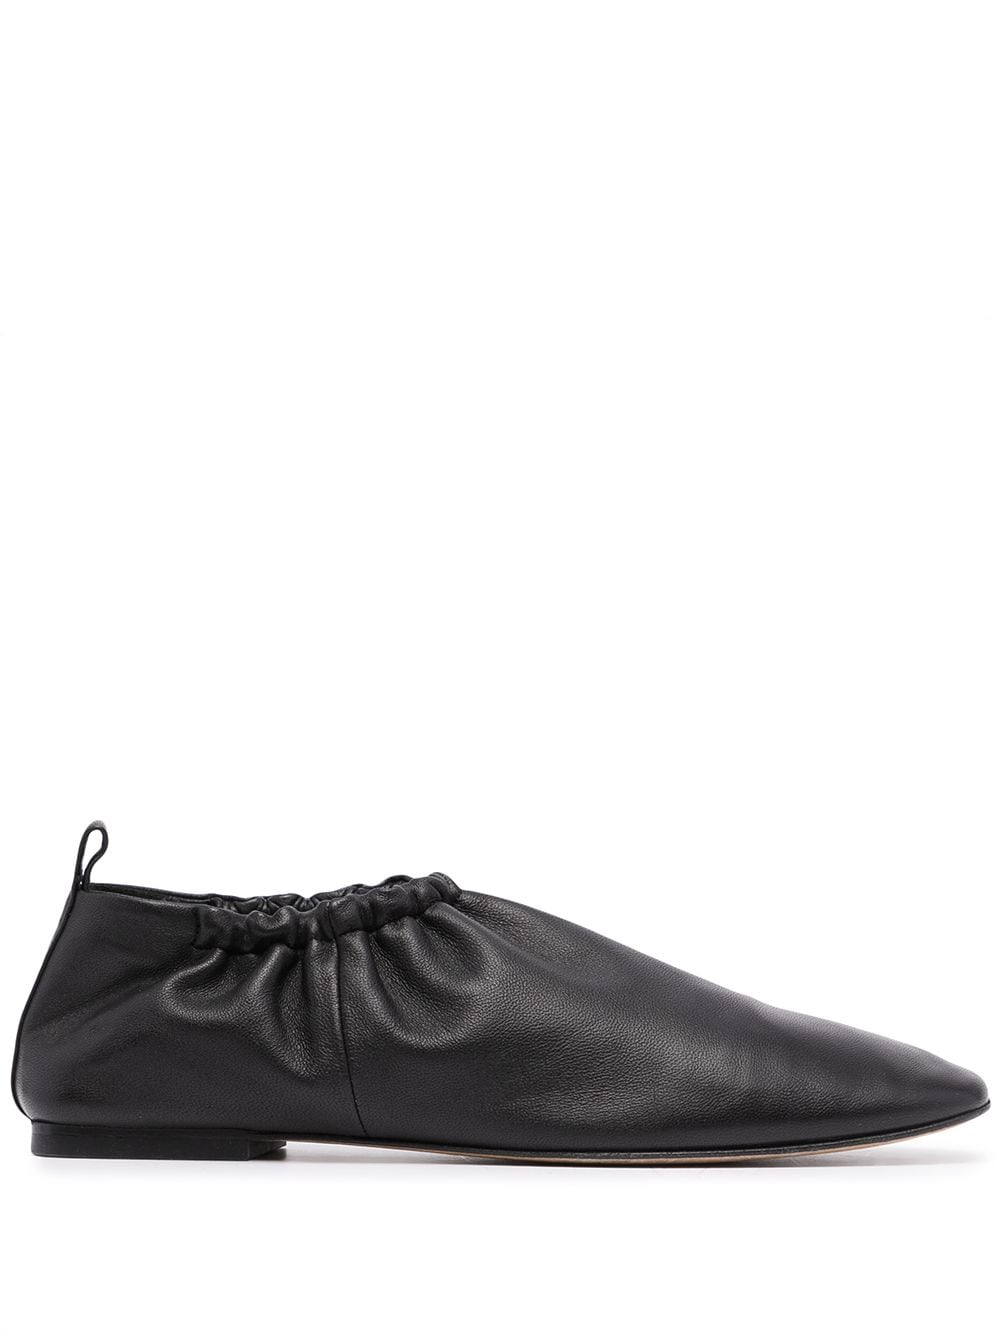 3.1 Phillip Lim ruched-details Leather Slippers - Farfetch